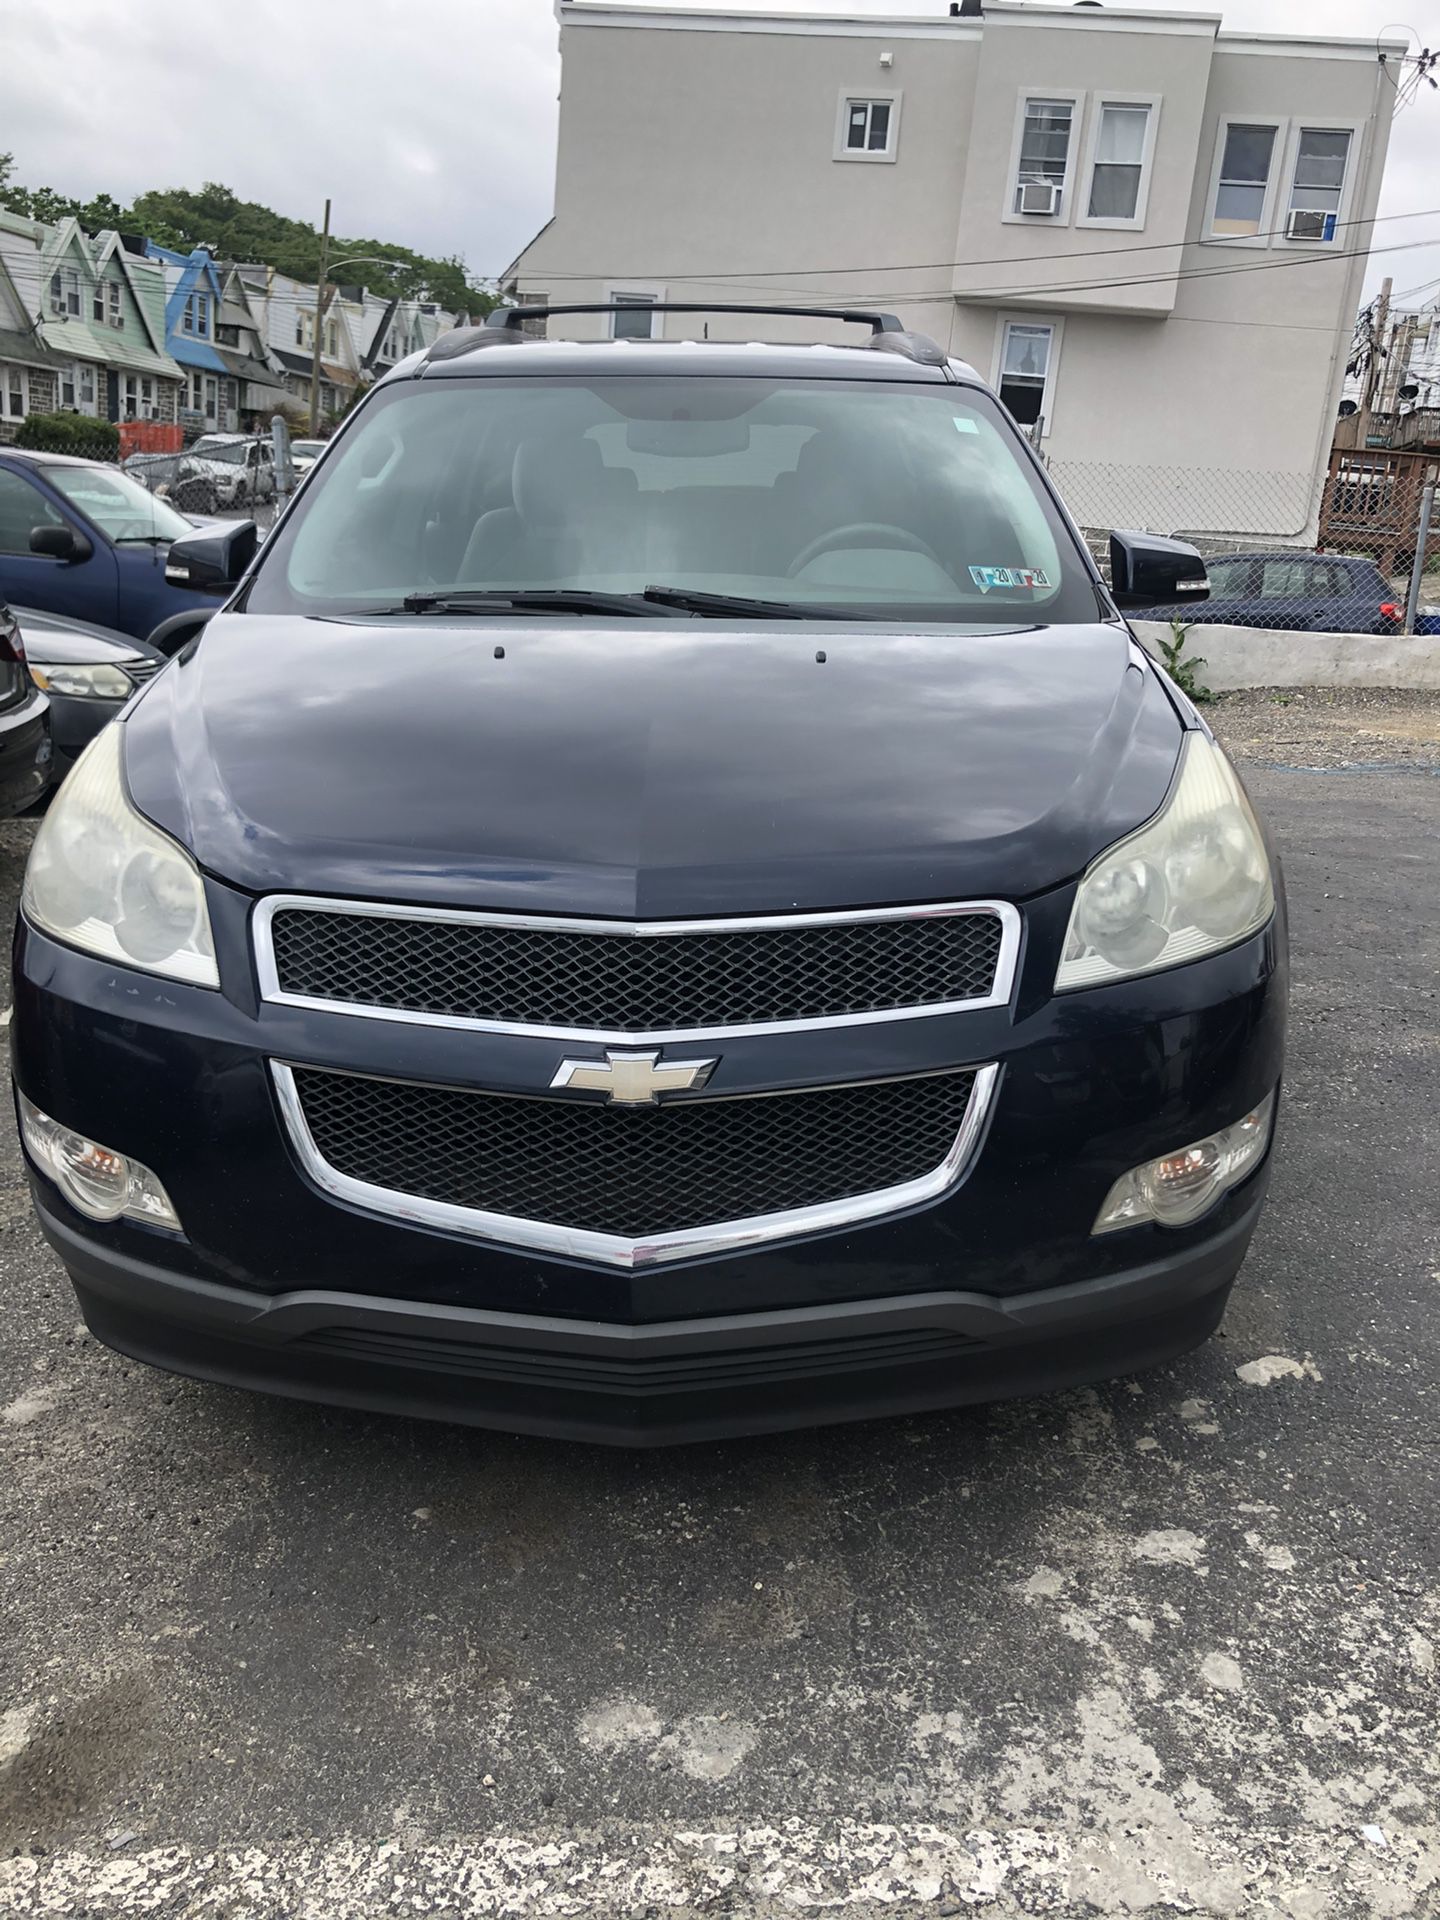 2011 Chevy Traverse, clean title no mechanical issue ready to drive, 134998 miles, super clean car, no scratches no dents no ripped